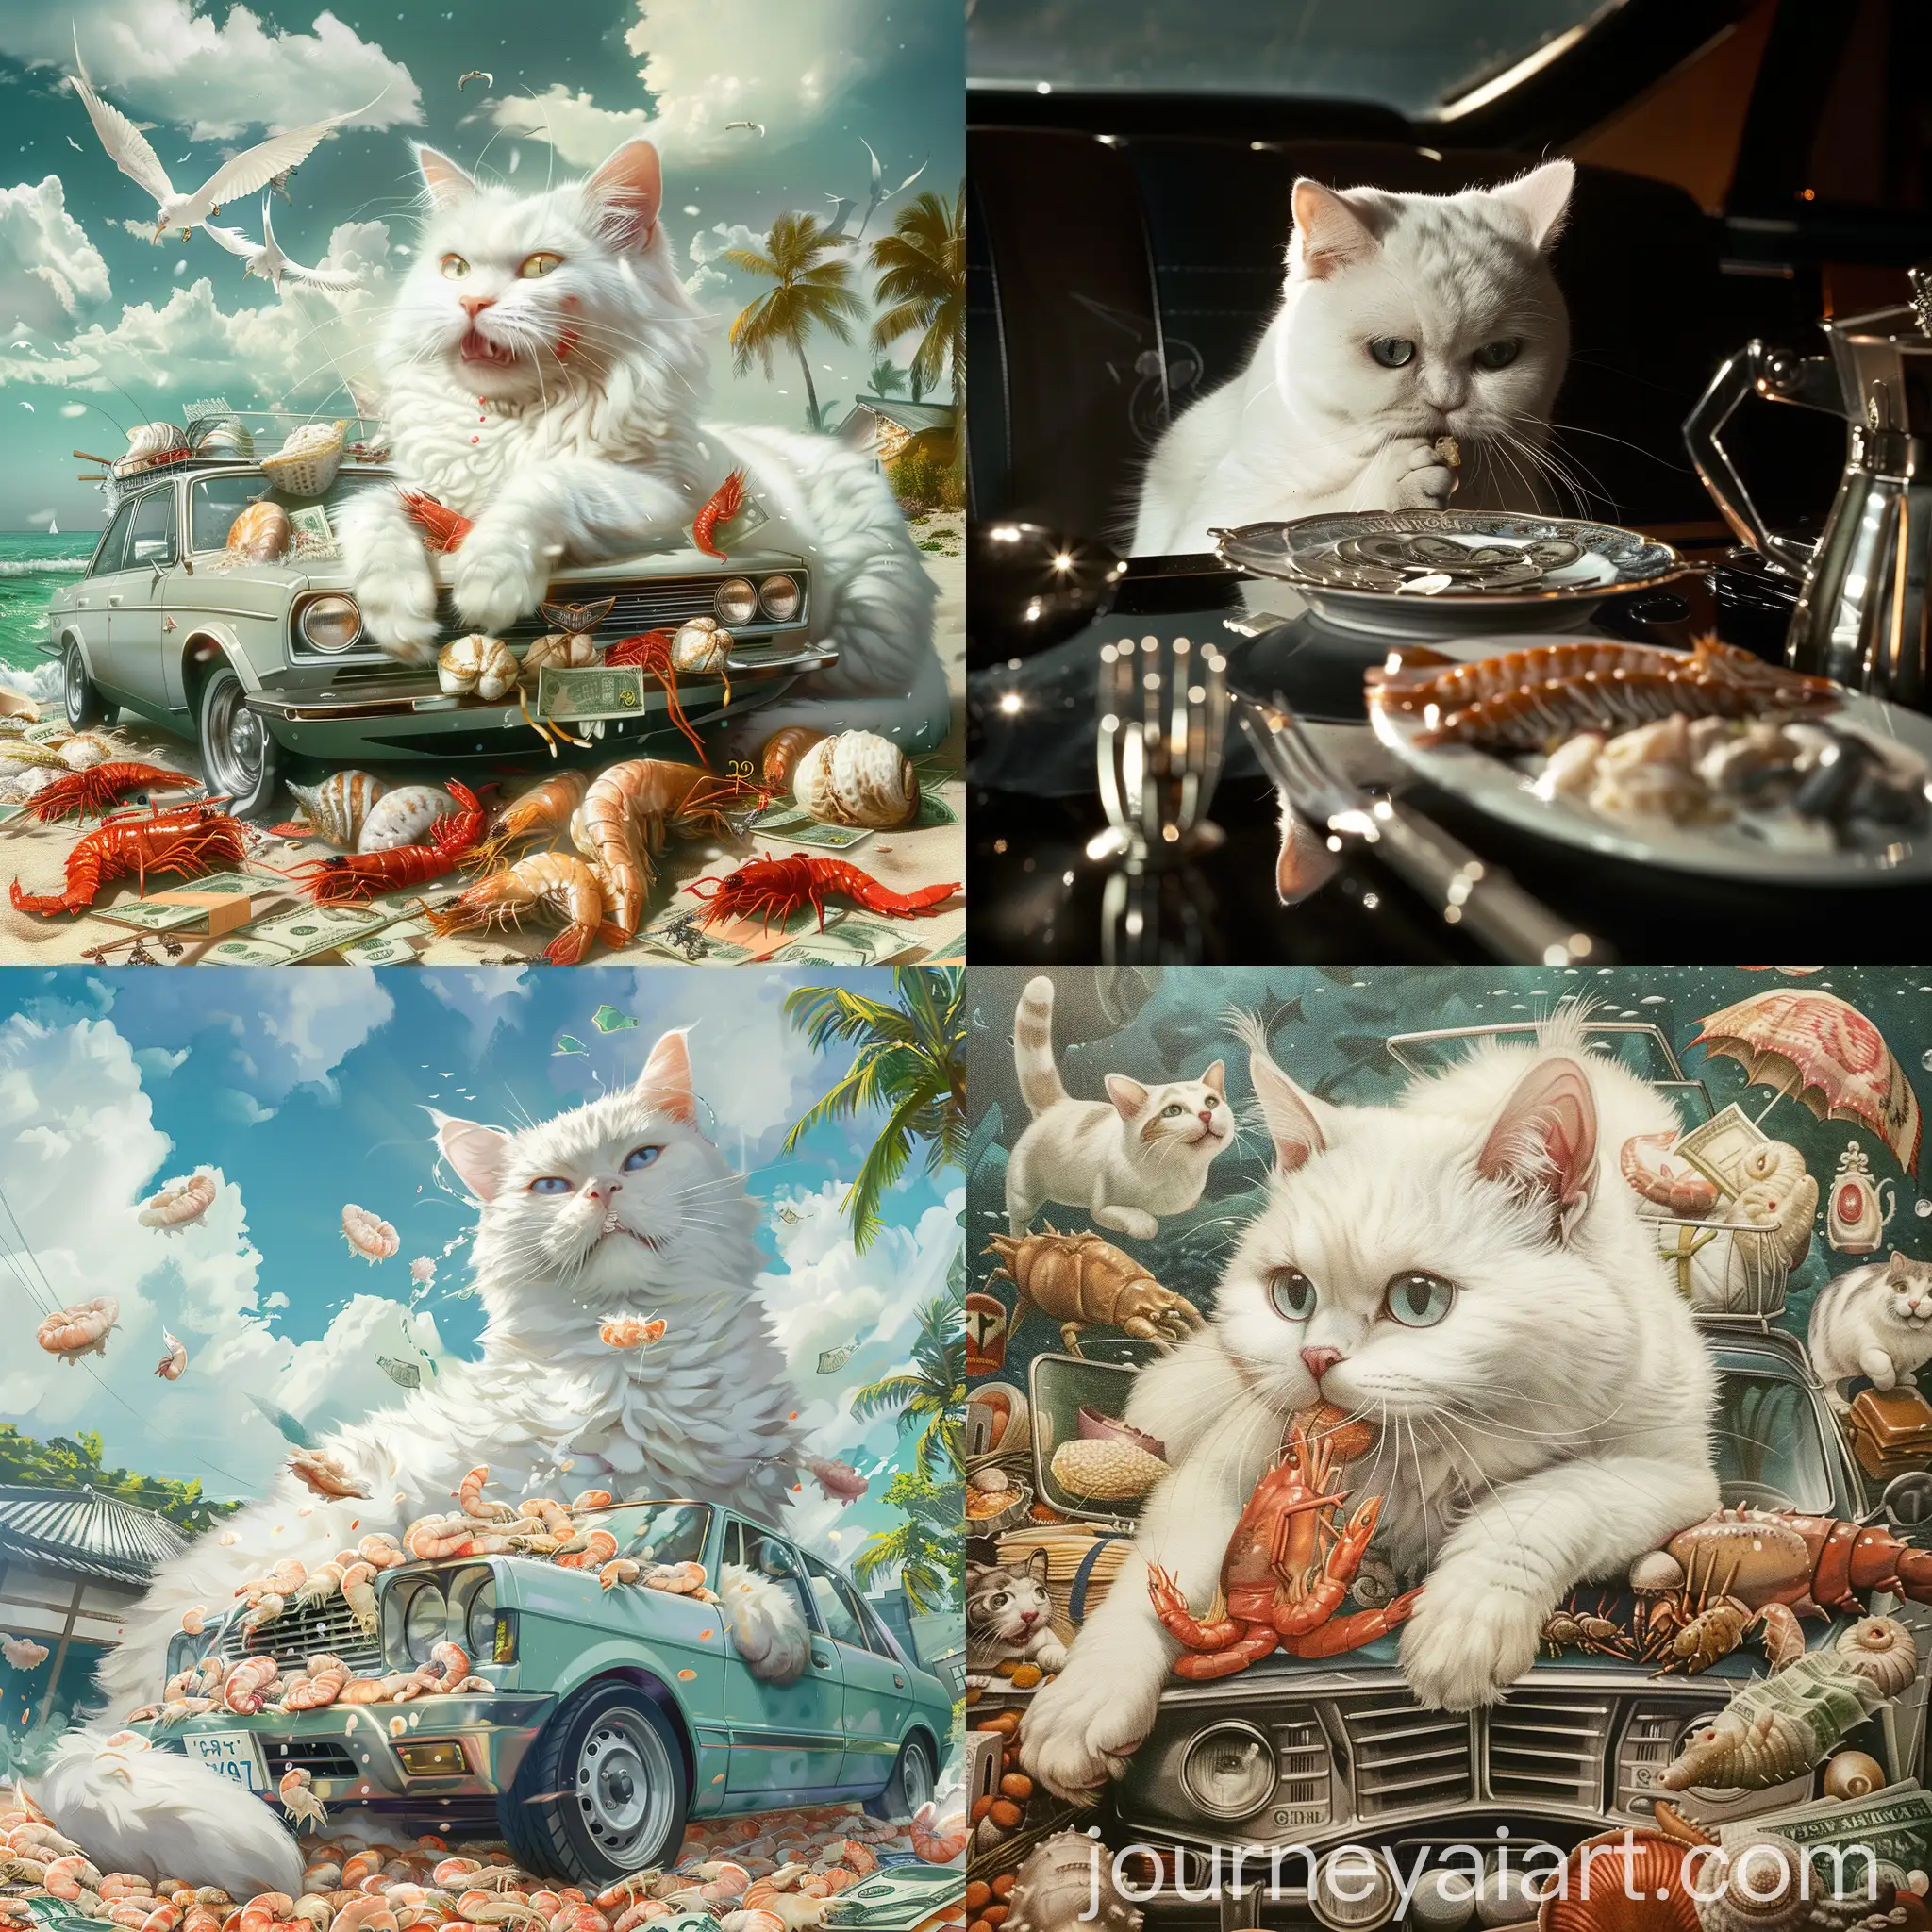 Luxurious-White-Cat-Eating-Seafood-with-Money-and-Fancy-Car